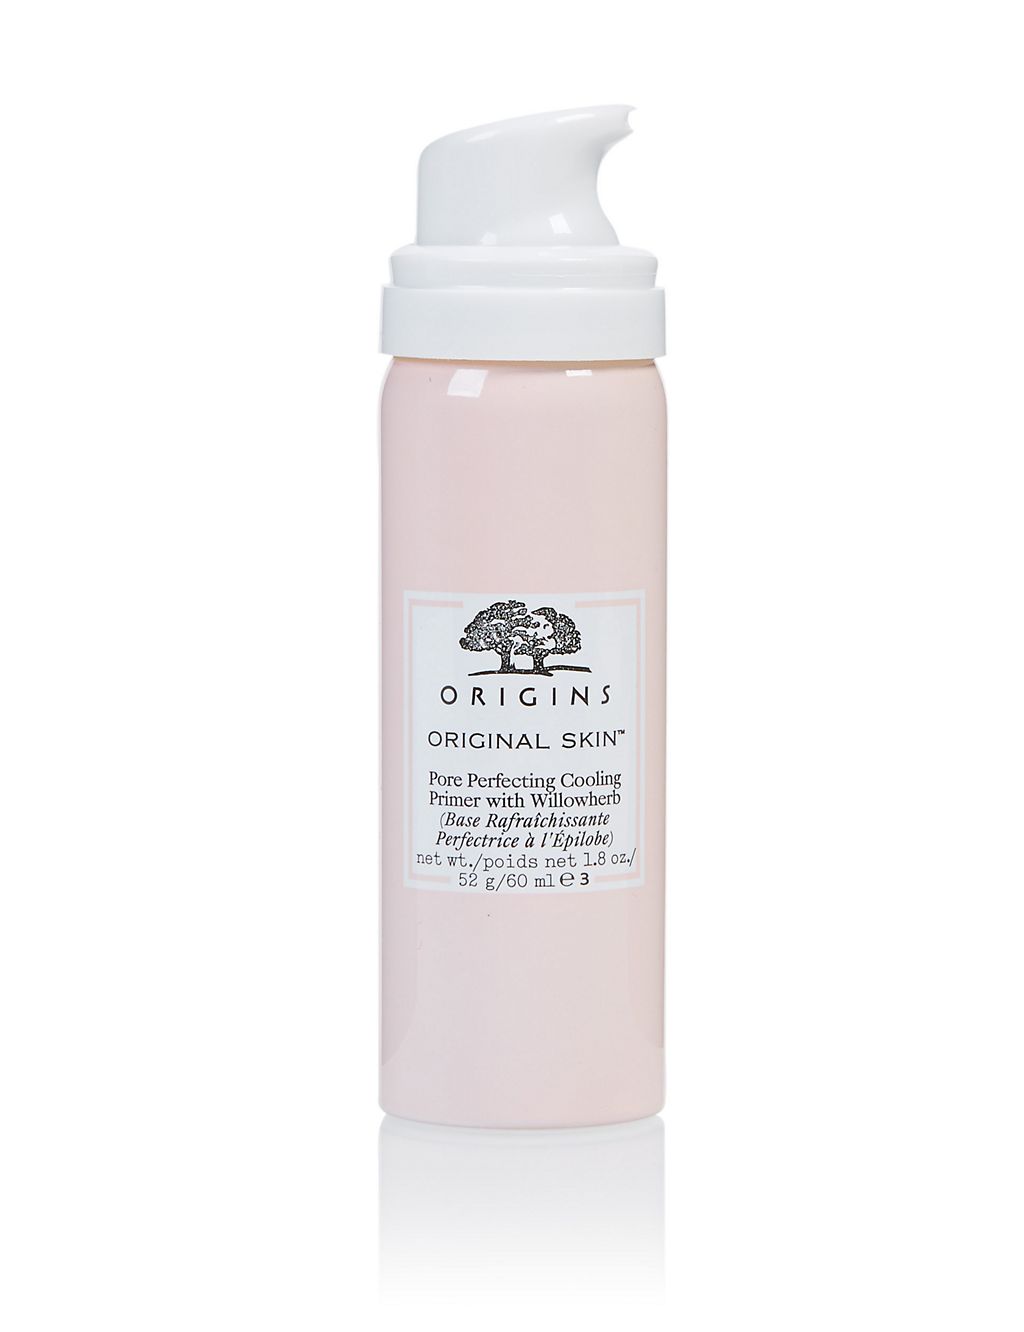 Original Skin™ Pore Perfecting Cooling Primer with Willowherb 60ml 3 of 3